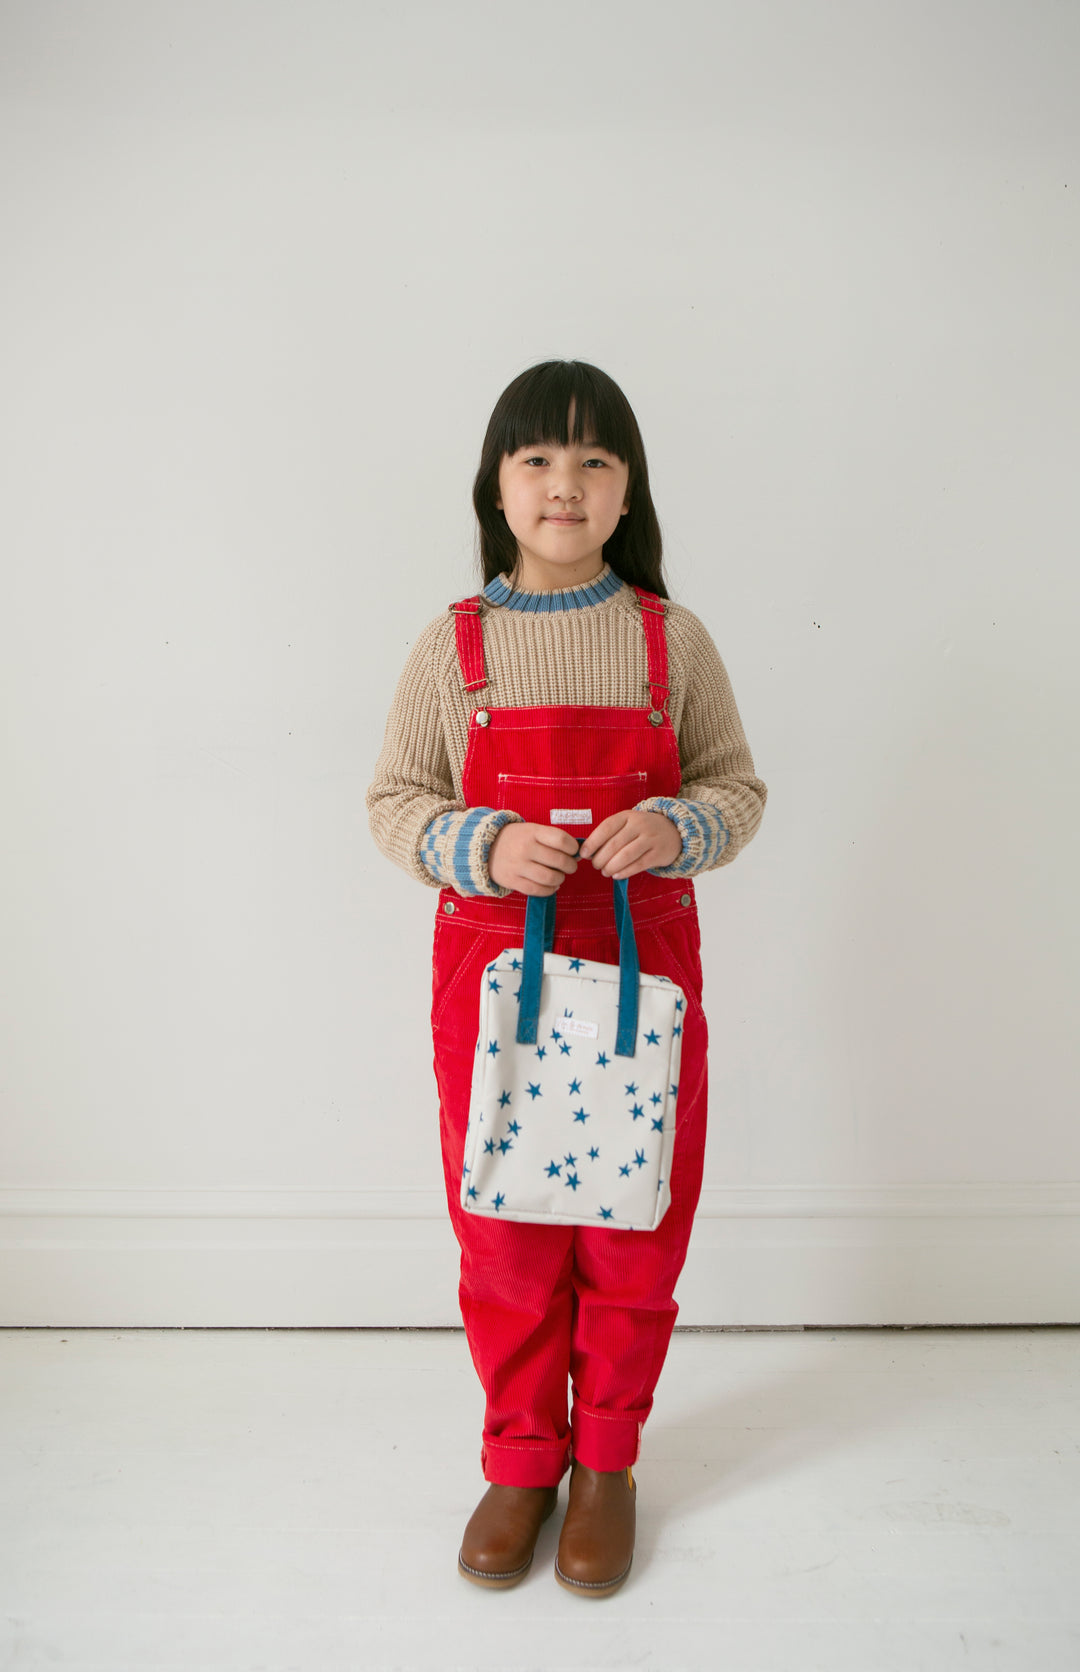 Fin and Vince Classic Overalls in Chilli | 30% OFF | Size 2-3y, 8-9y |Children of the Wild